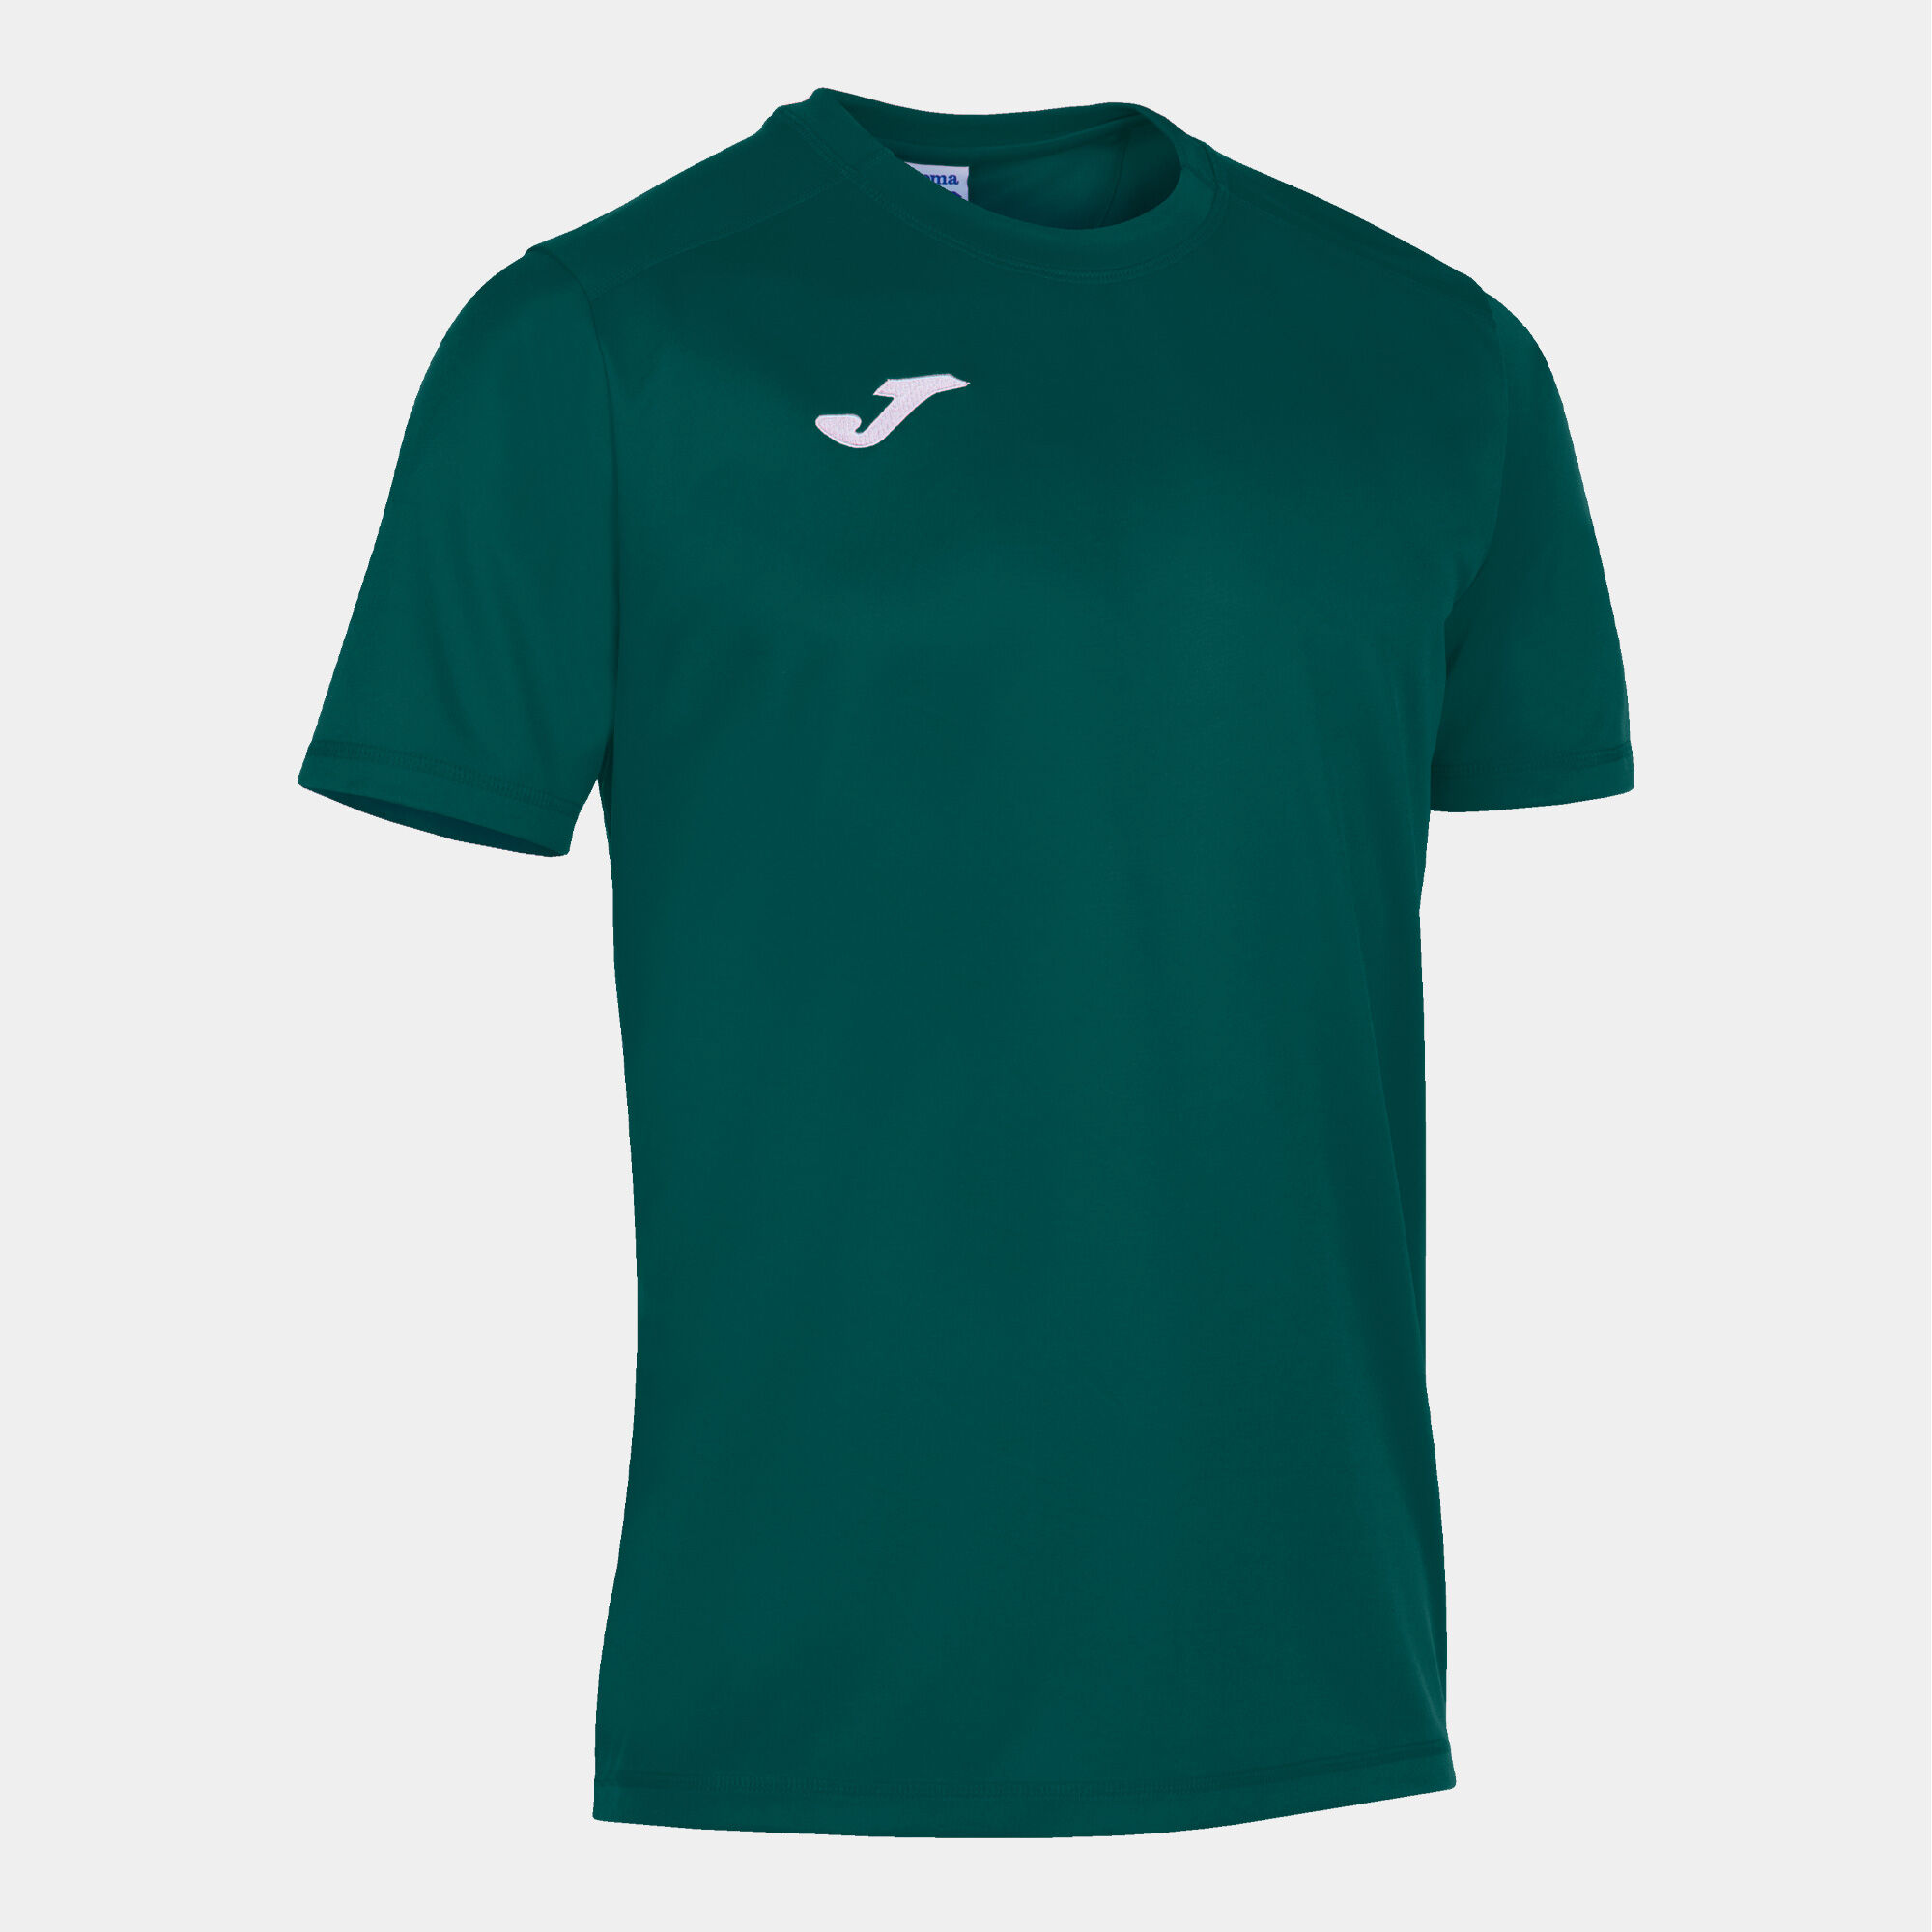 Maillot manches courtes homme Strong vert